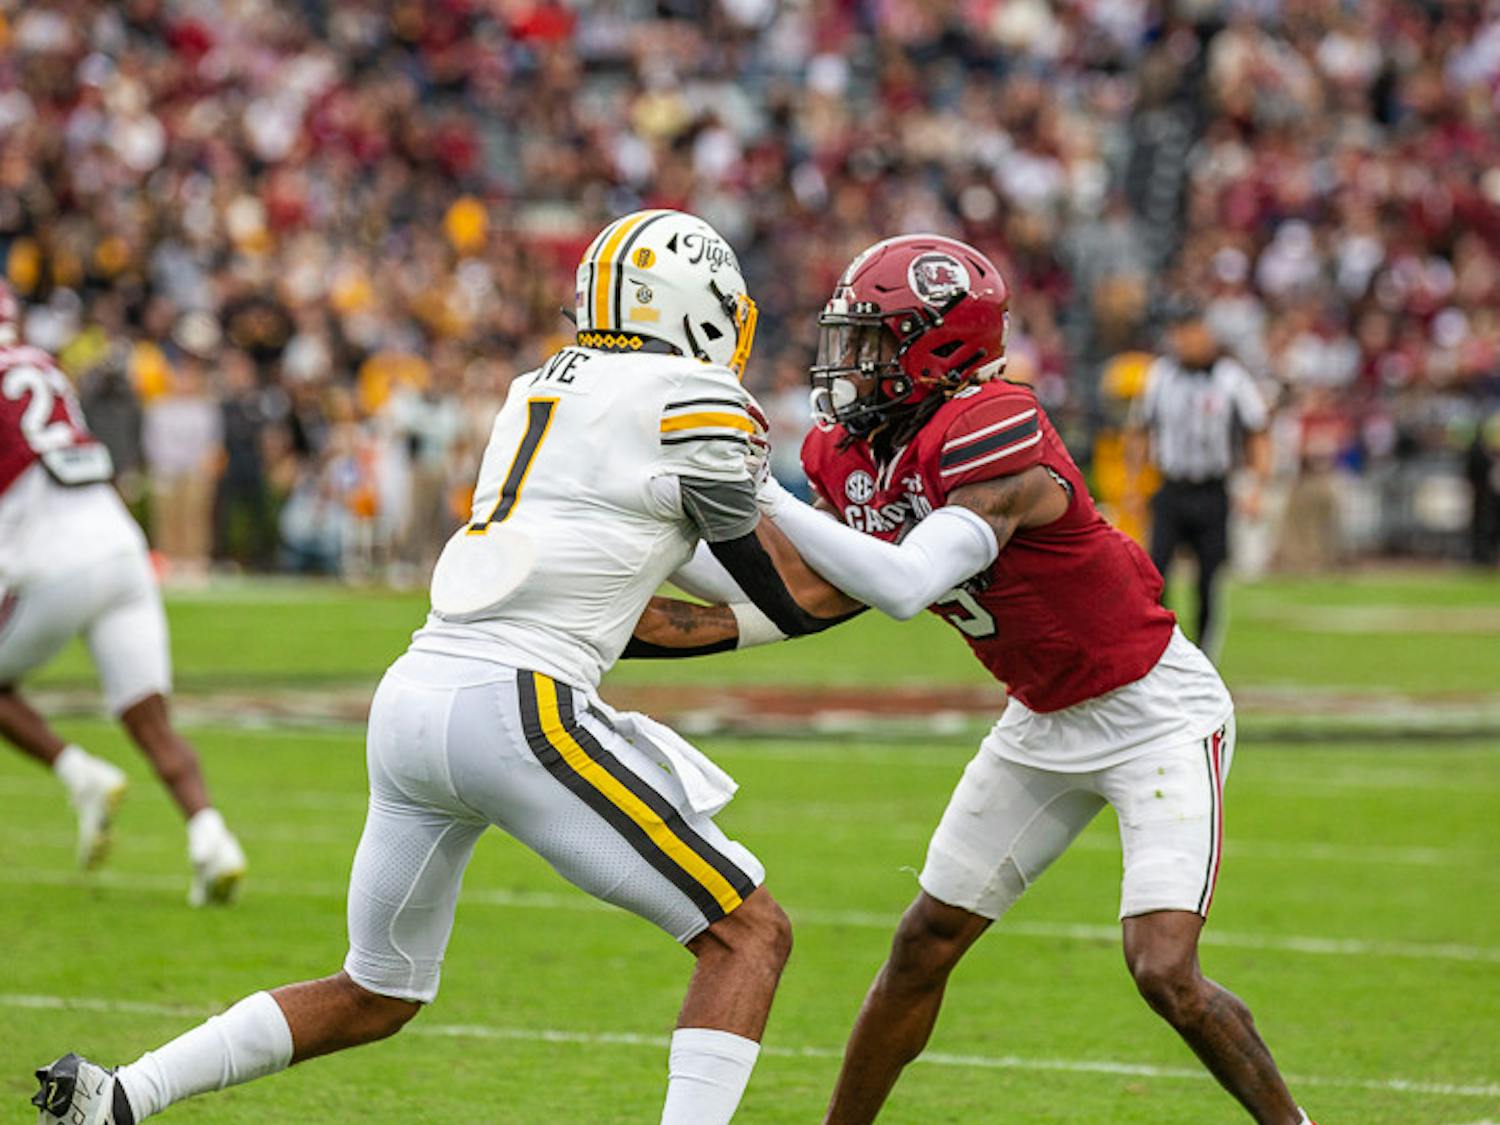 Redshirt junior Cam Smith (on right) holds back a Missouri wide receiver during the South Carolina and Missouri matchup on Oct. 29, 2022. Missouri beat the Gamecocks 23-10.